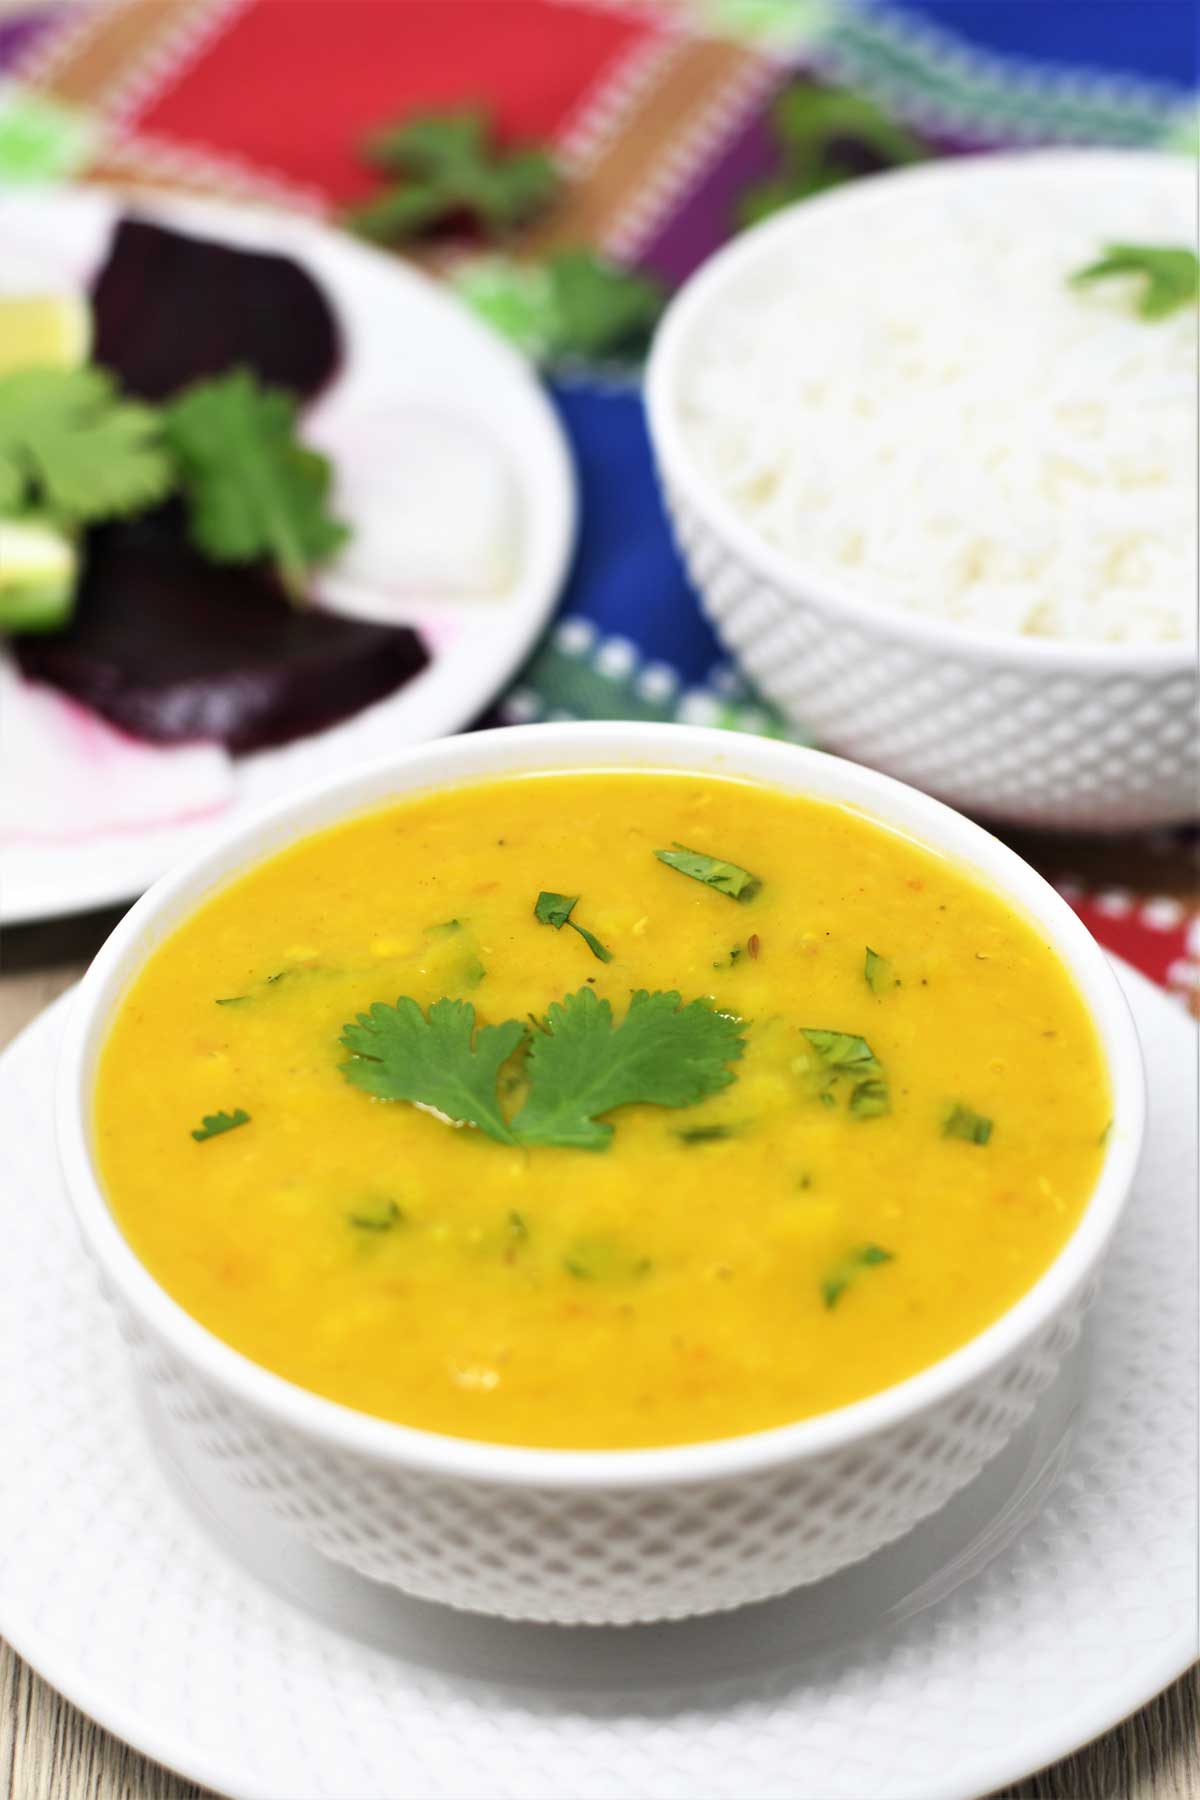 Masoor Dal served in a bowl.